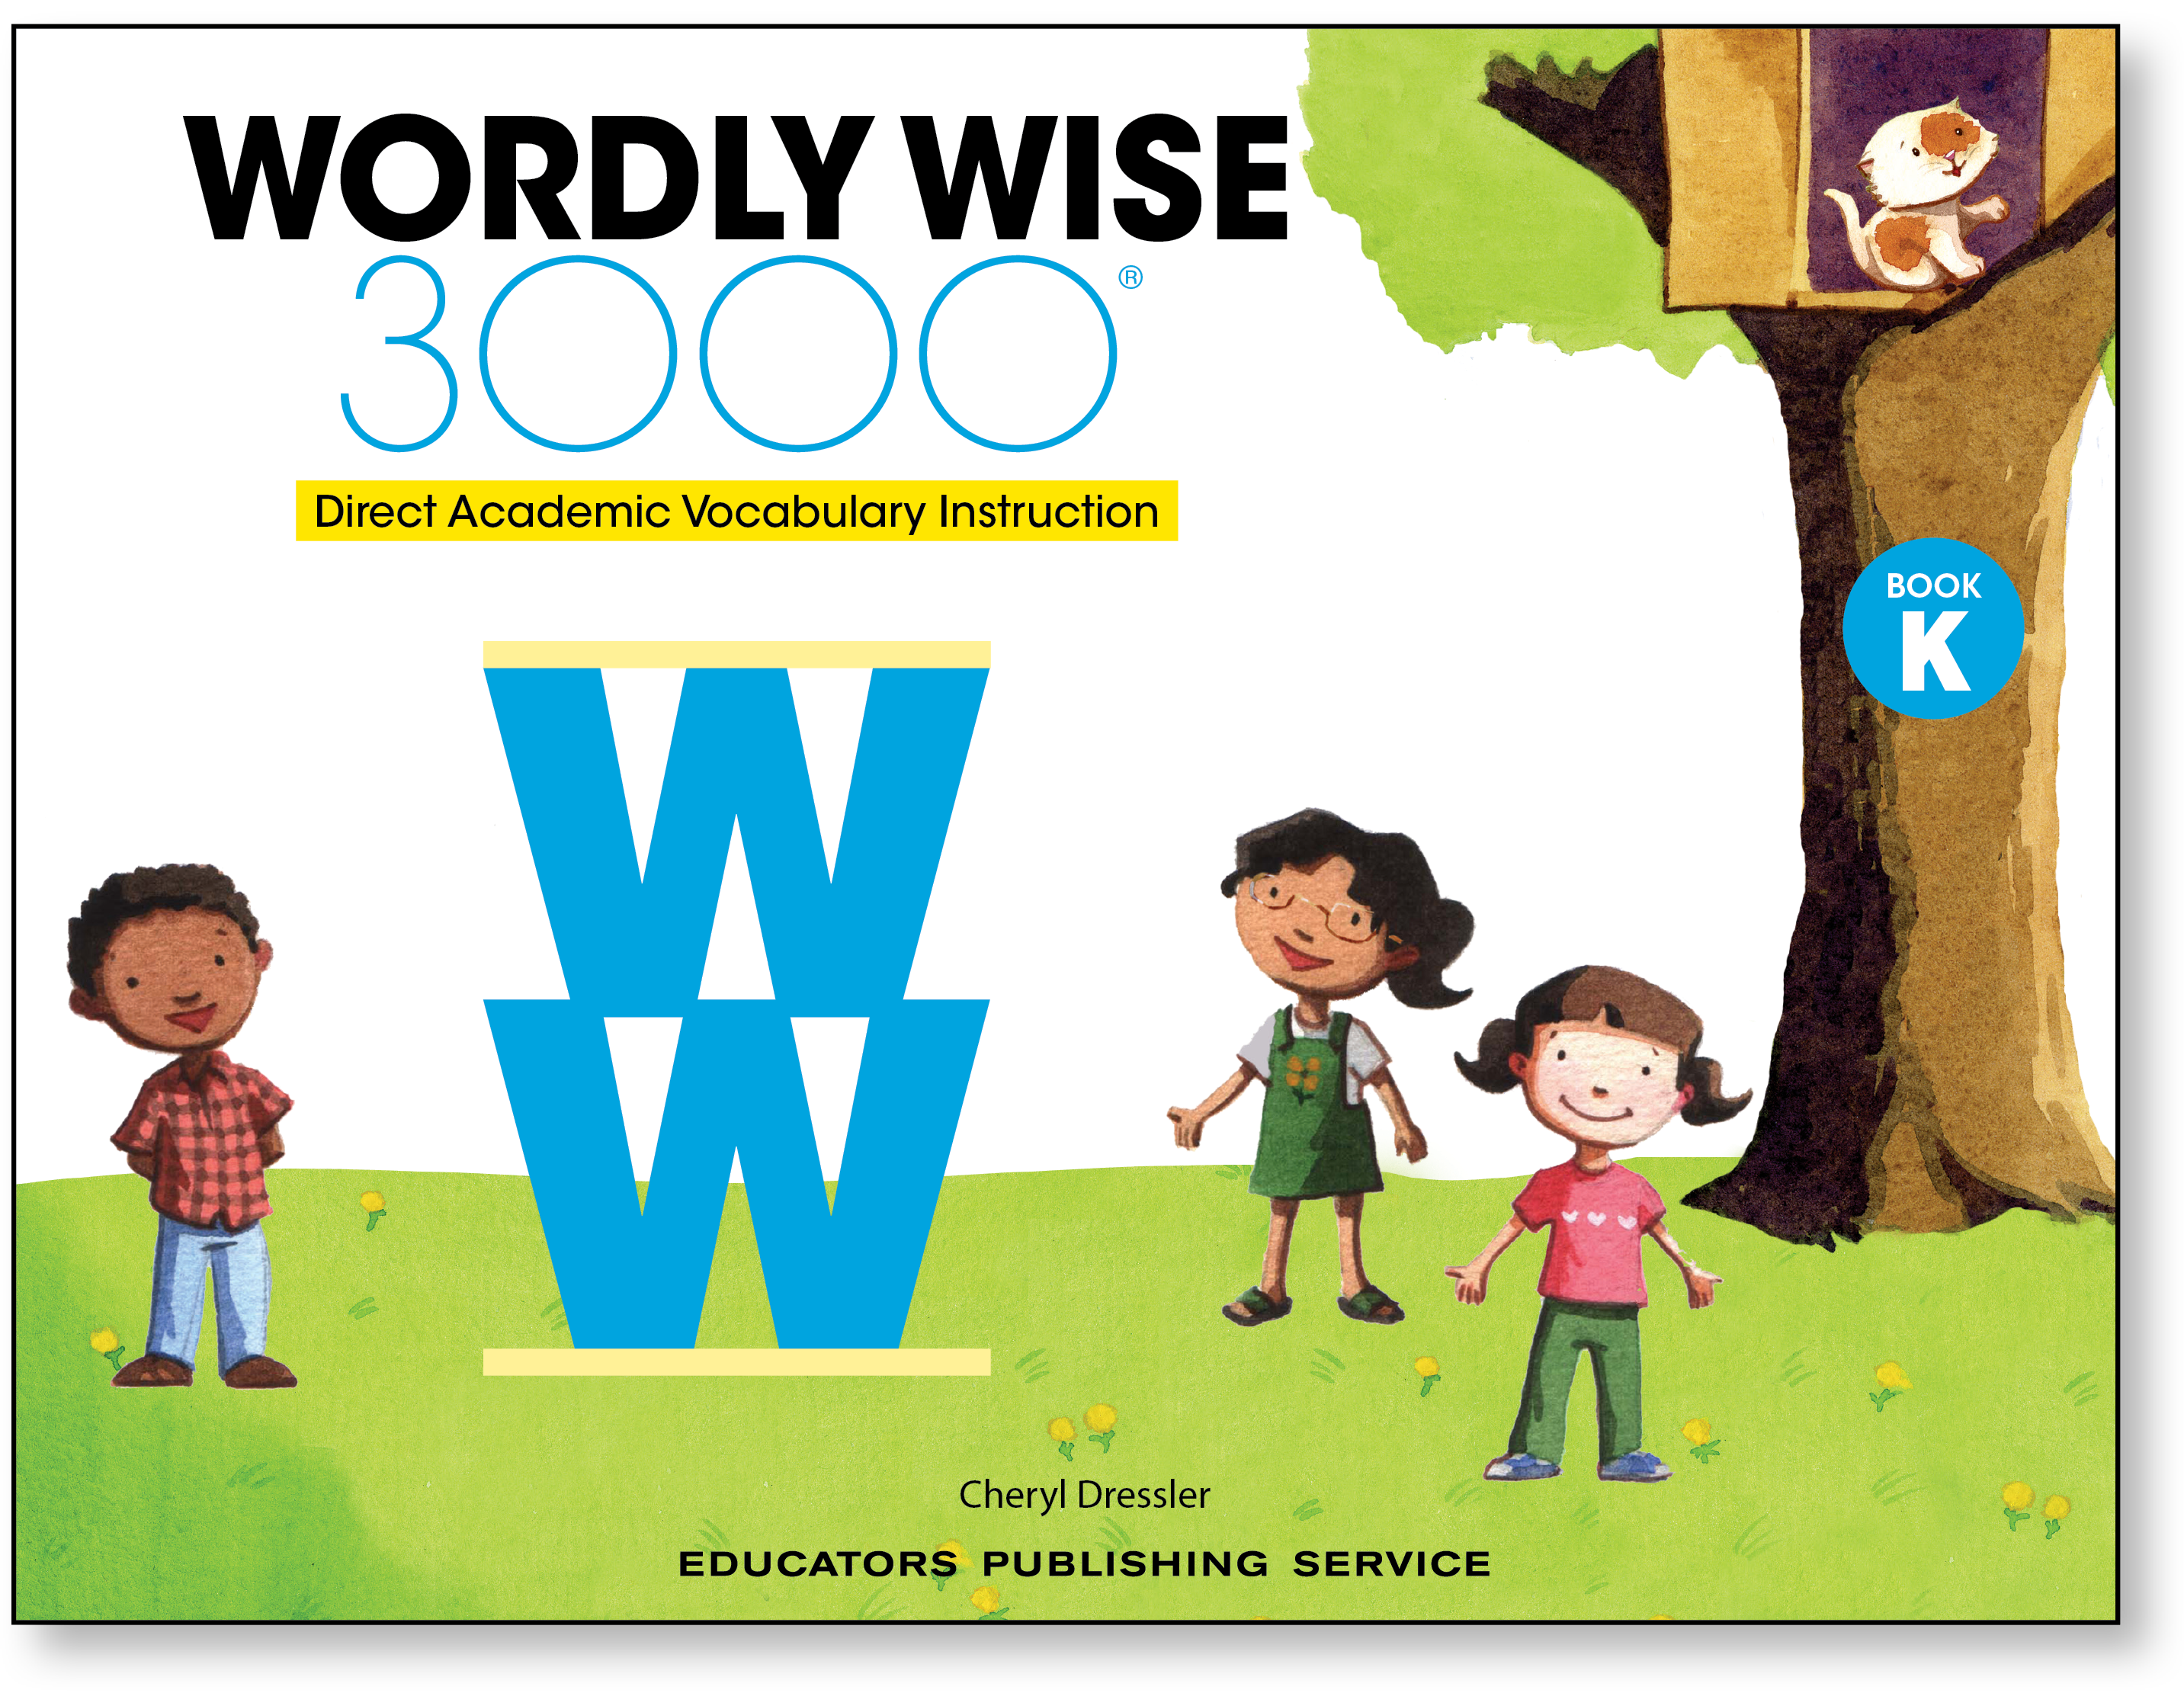 4th　Wise　Student,　Edition　Book　3000　Wordly　K